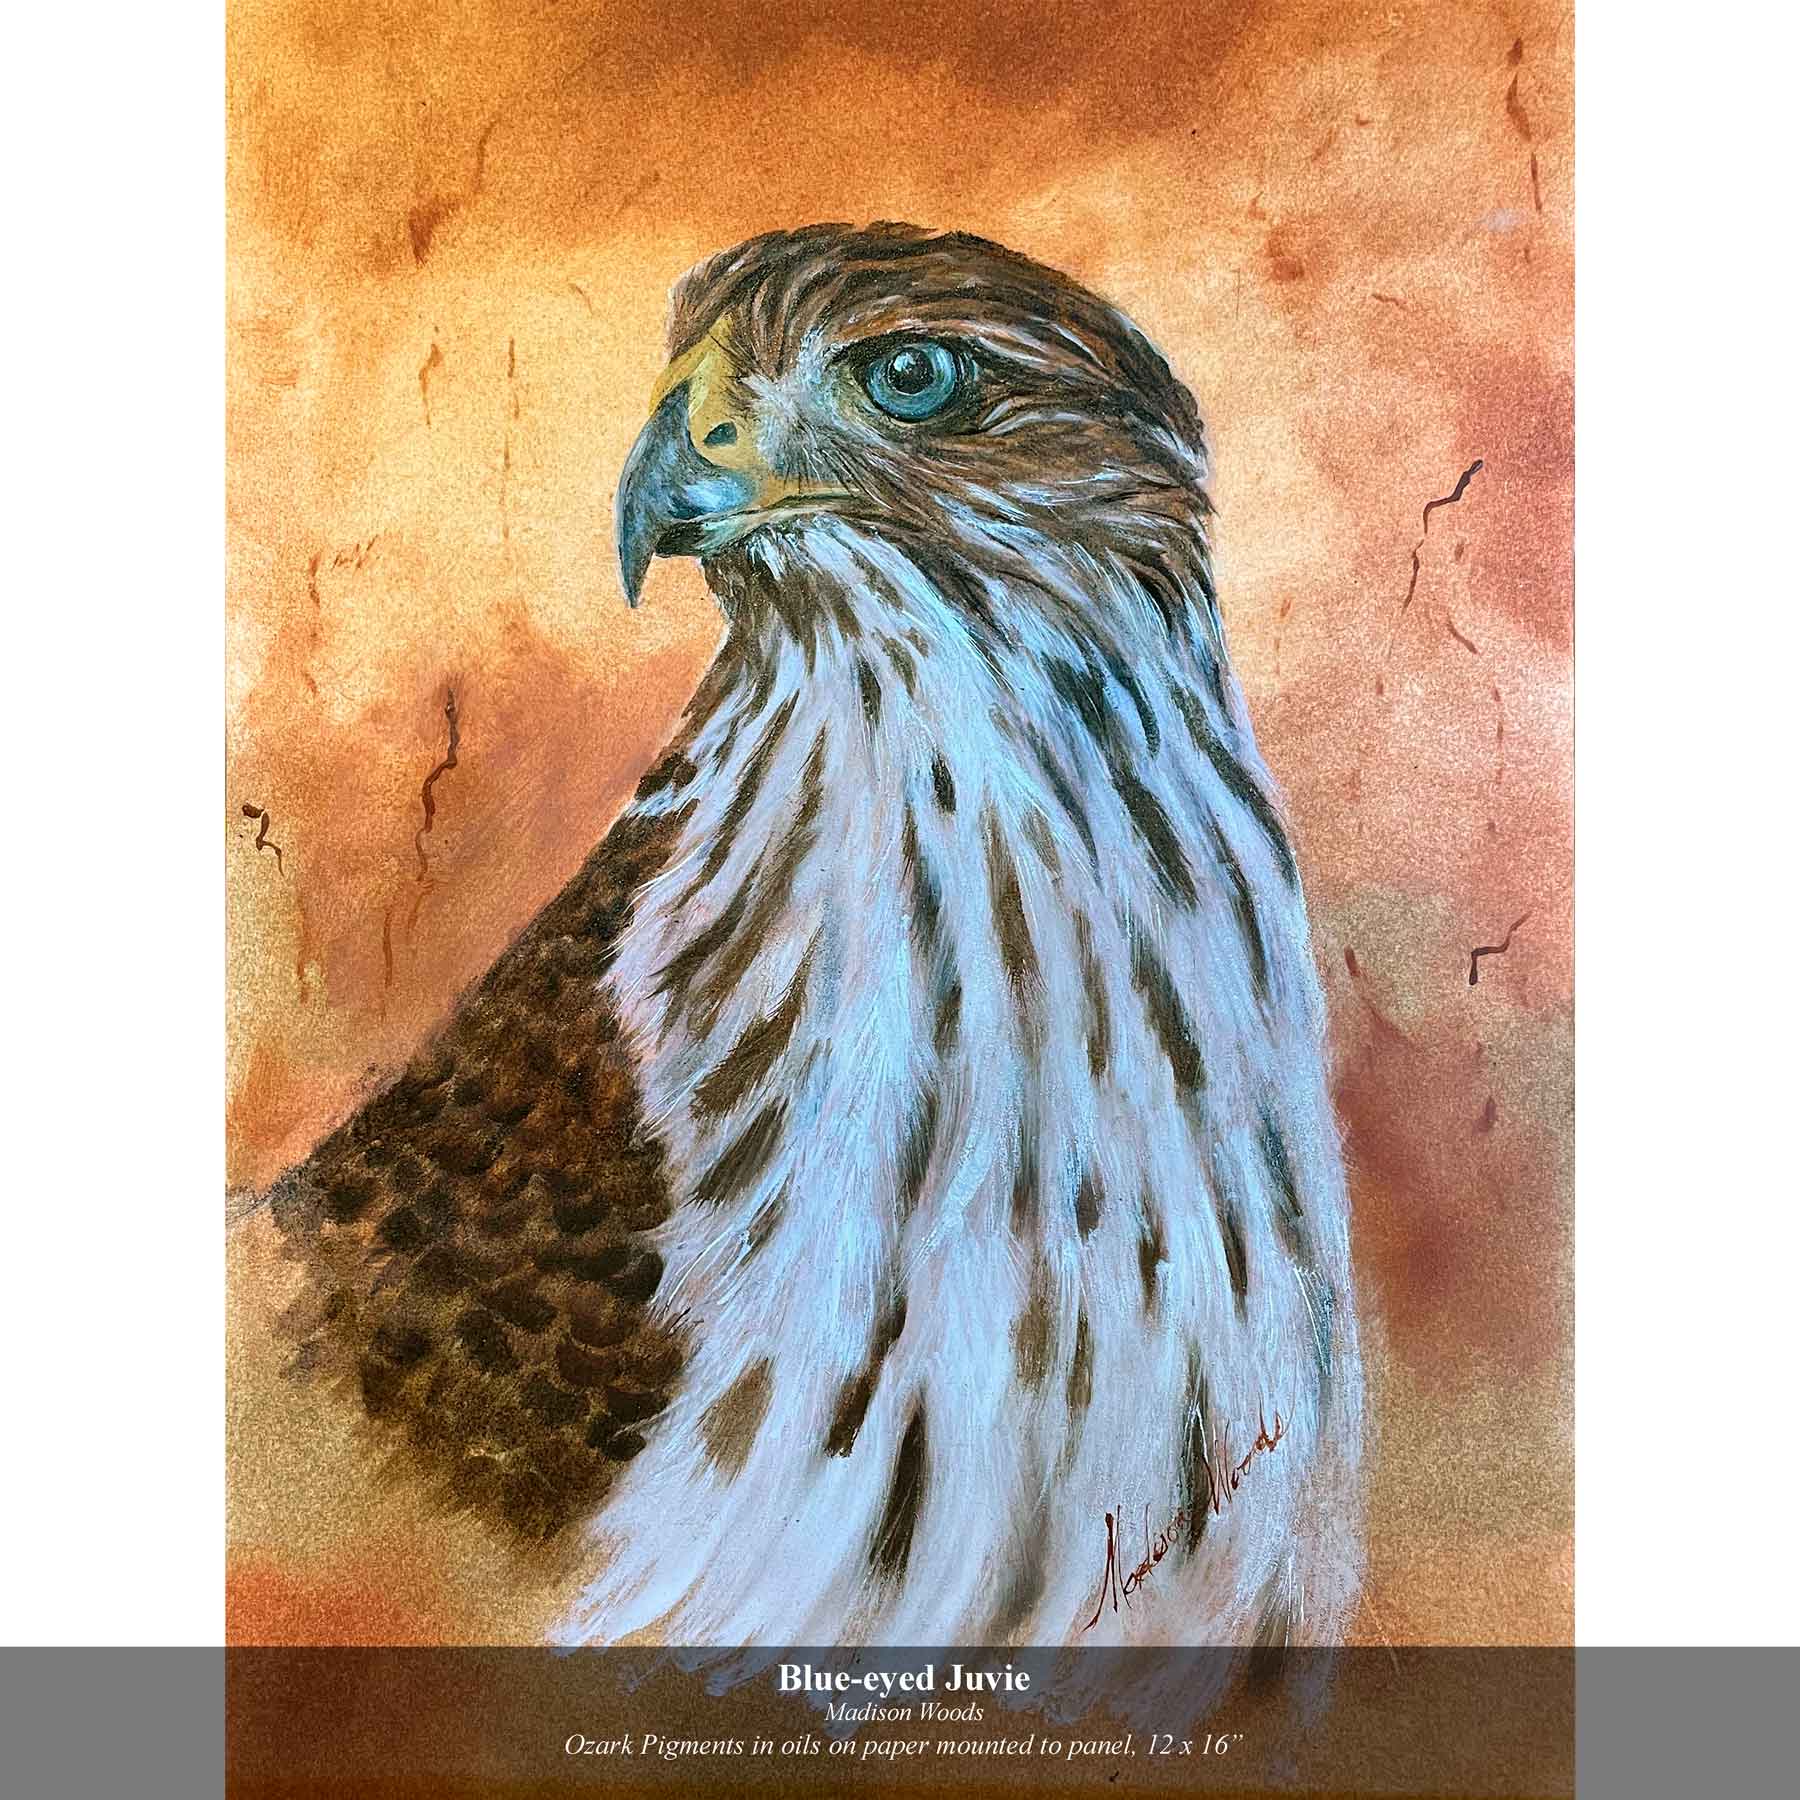 A painting of a Cooper's hawk by Madison Woods.